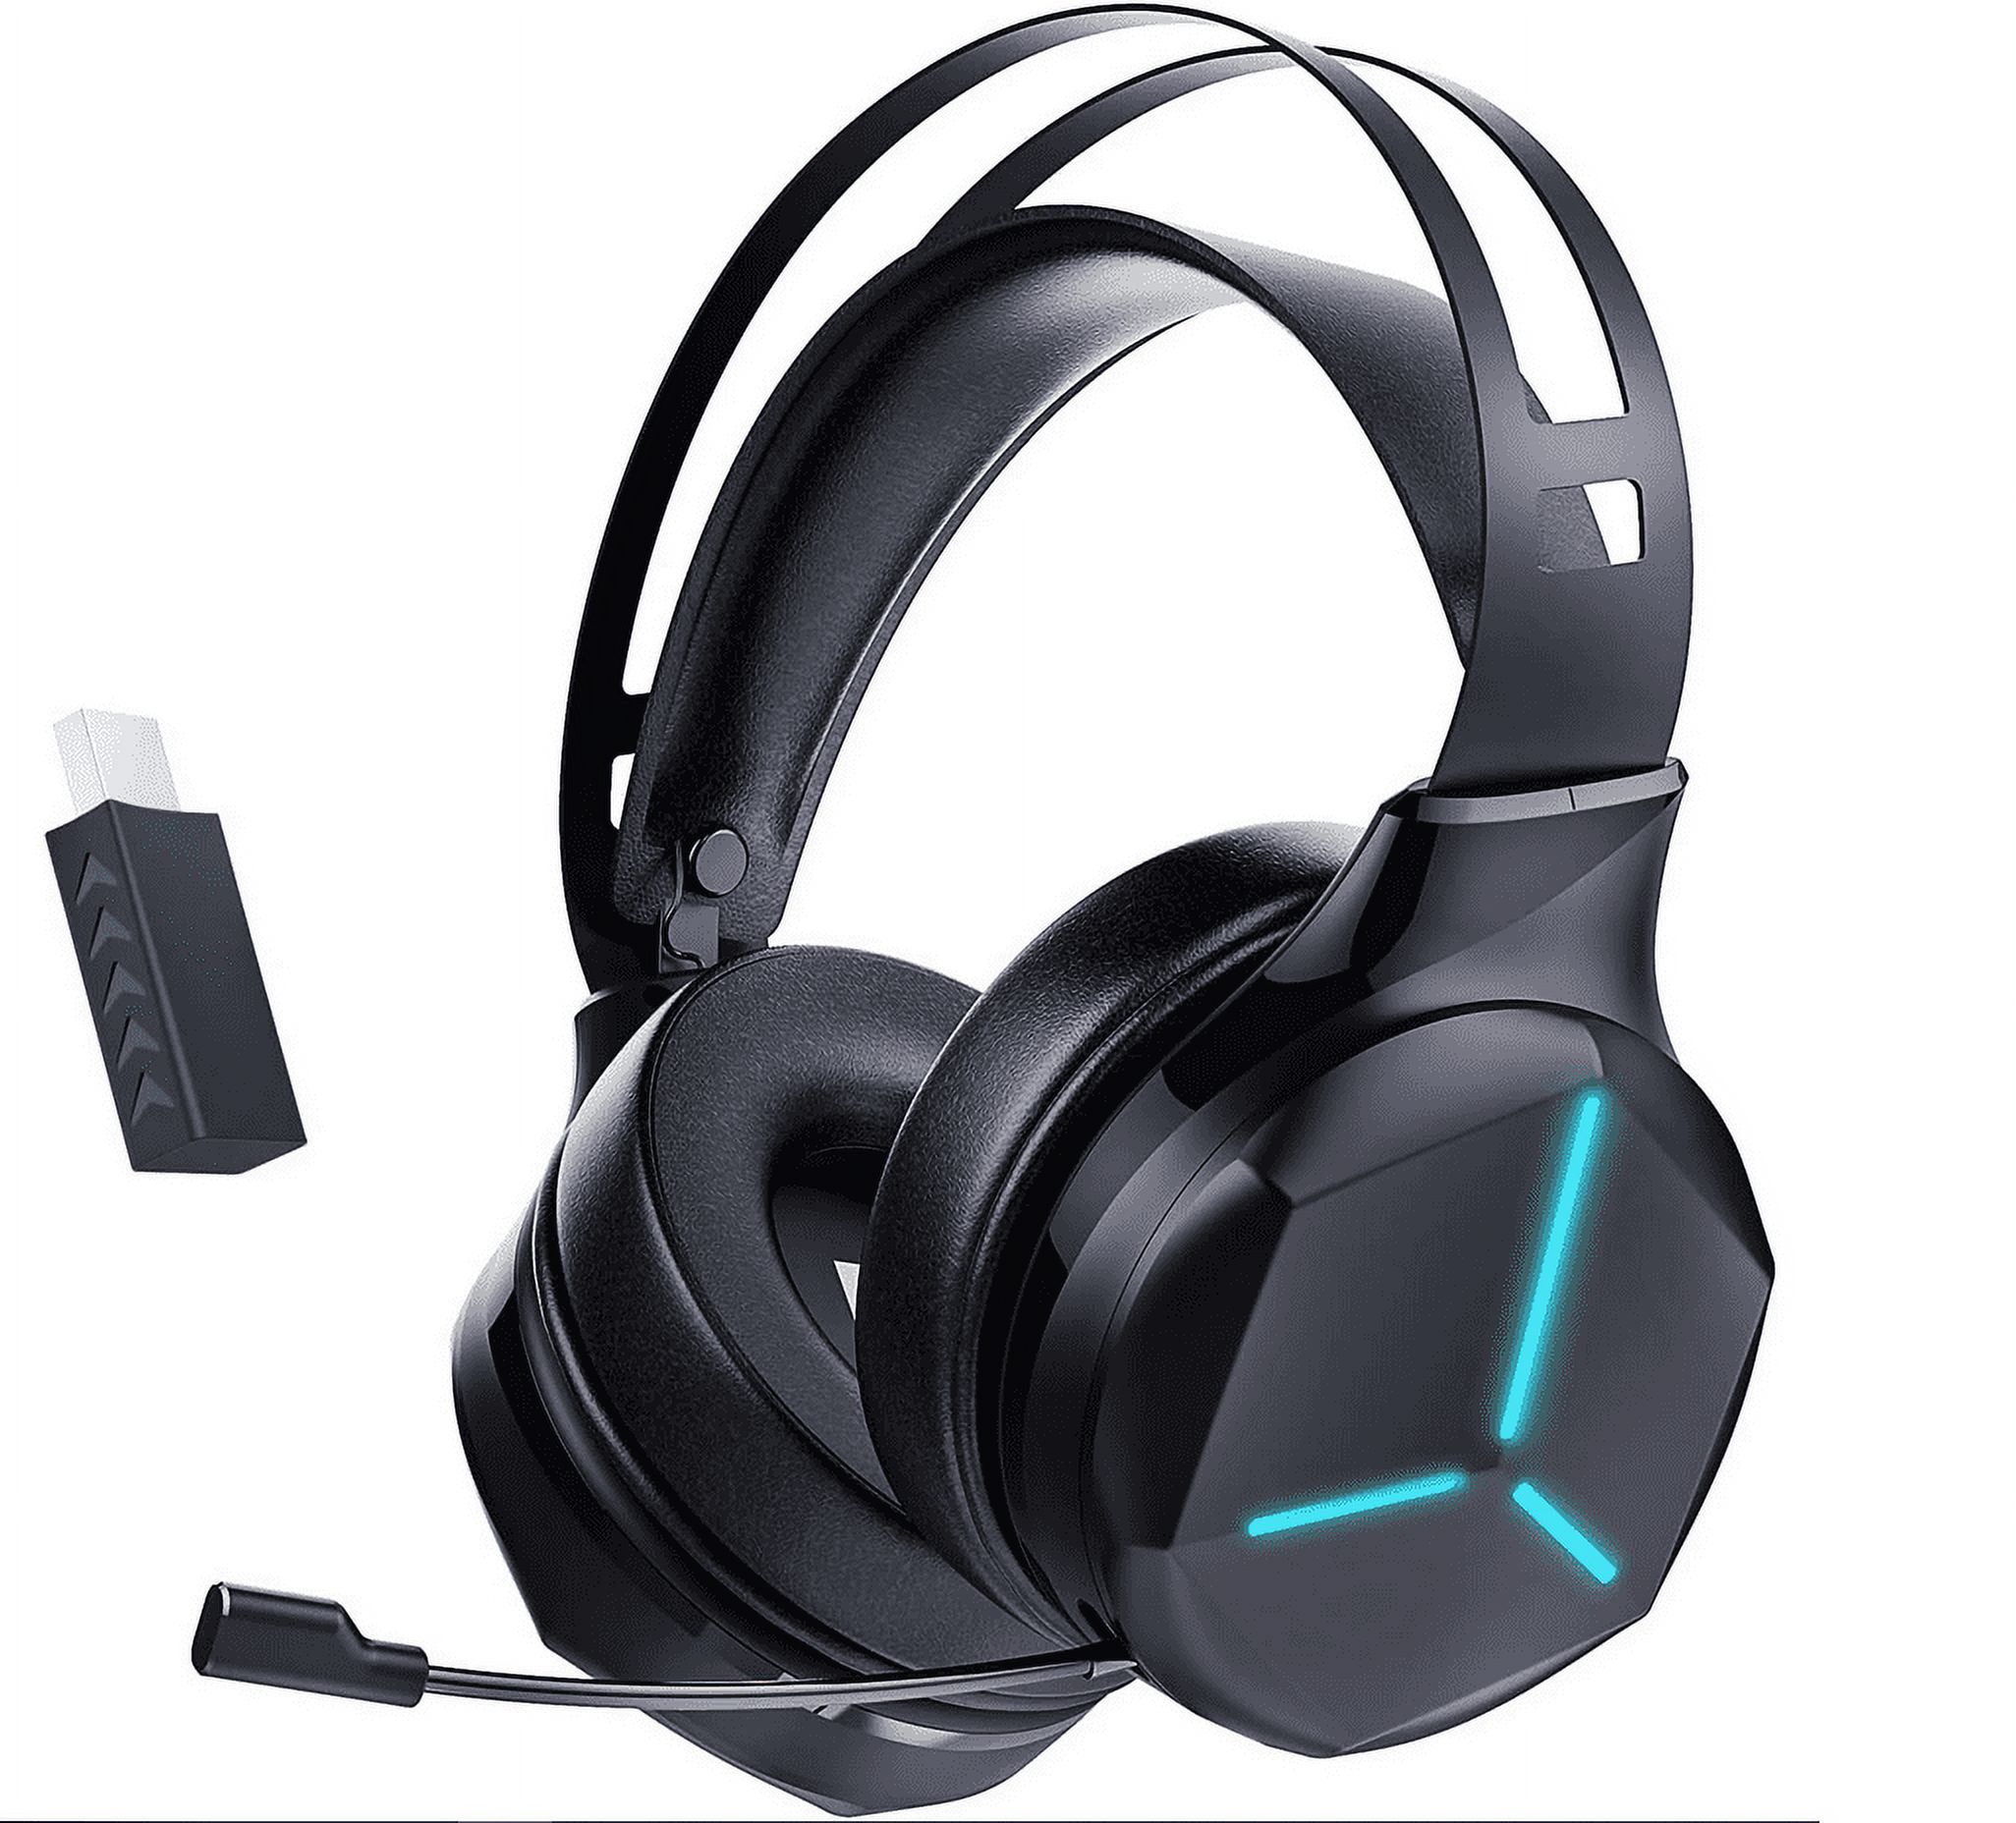 Wireless Wonders: Finding the Perfect Headset for Xbox Series S缩略图